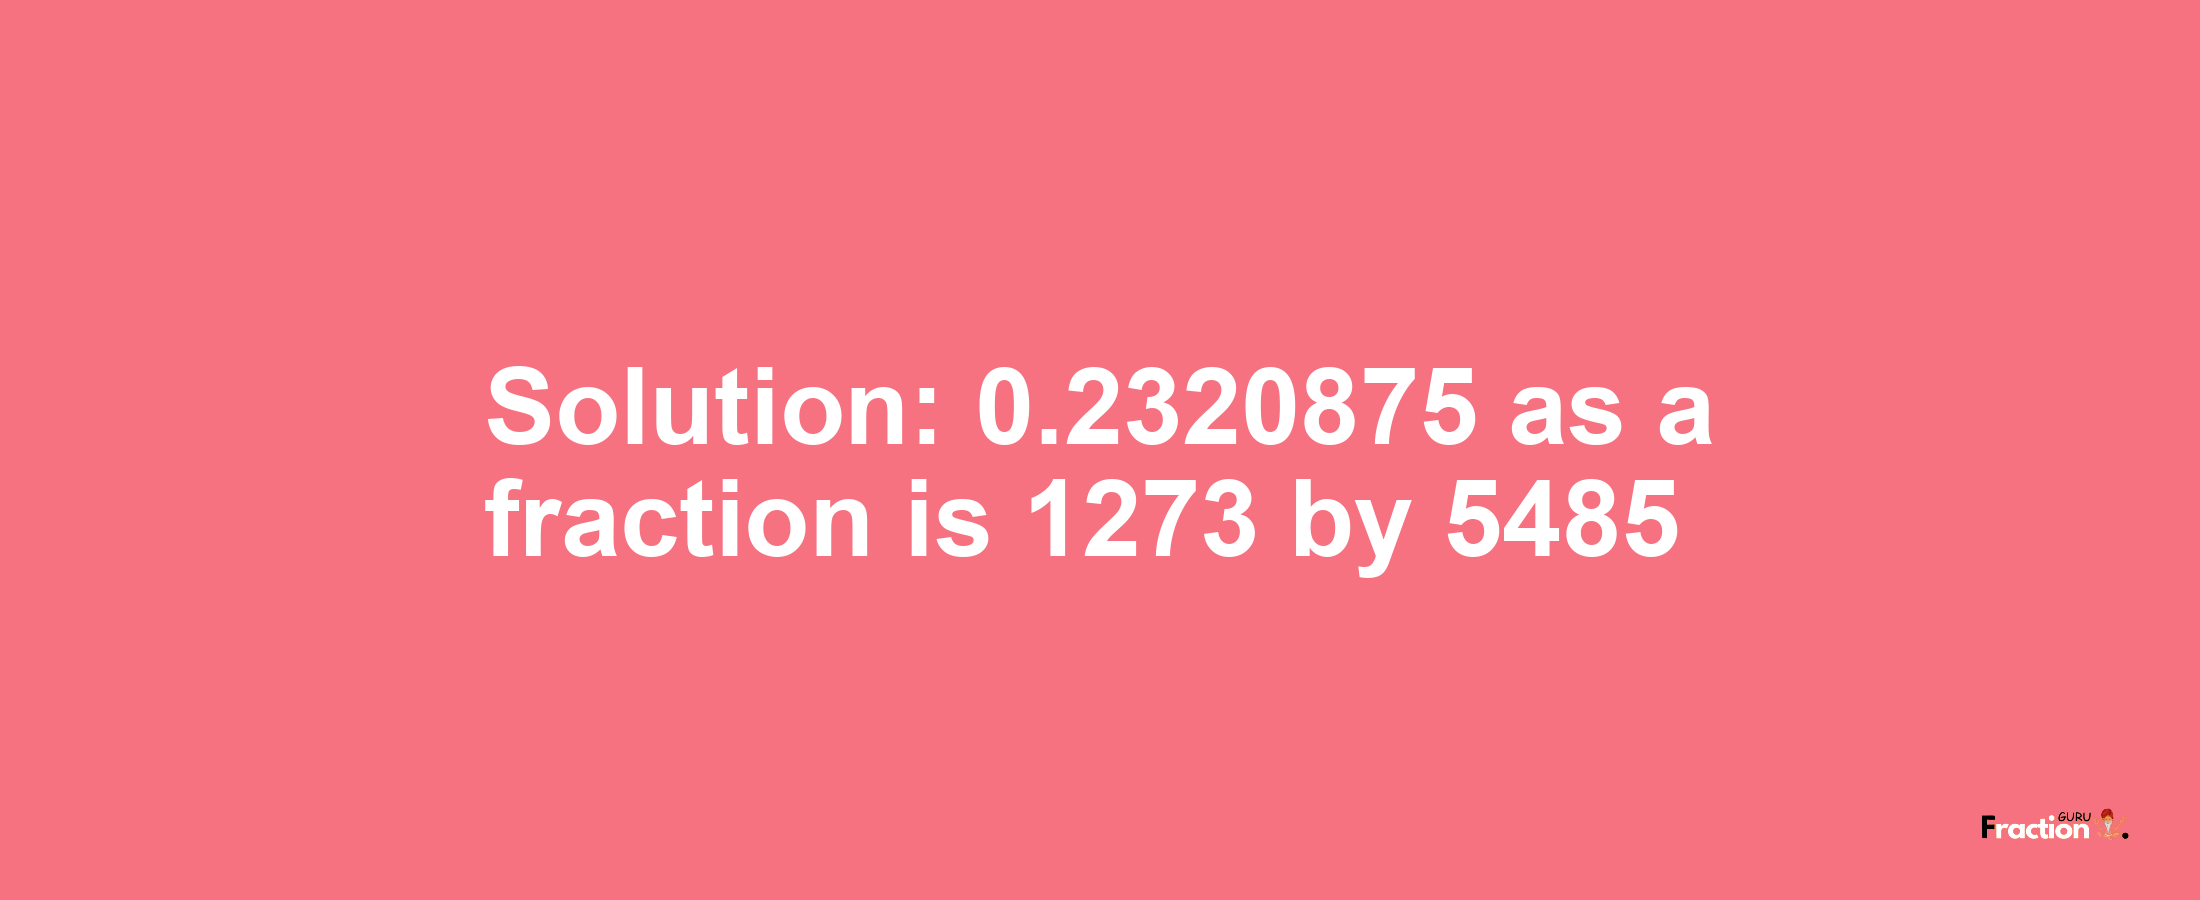 Solution:0.2320875 as a fraction is 1273/5485